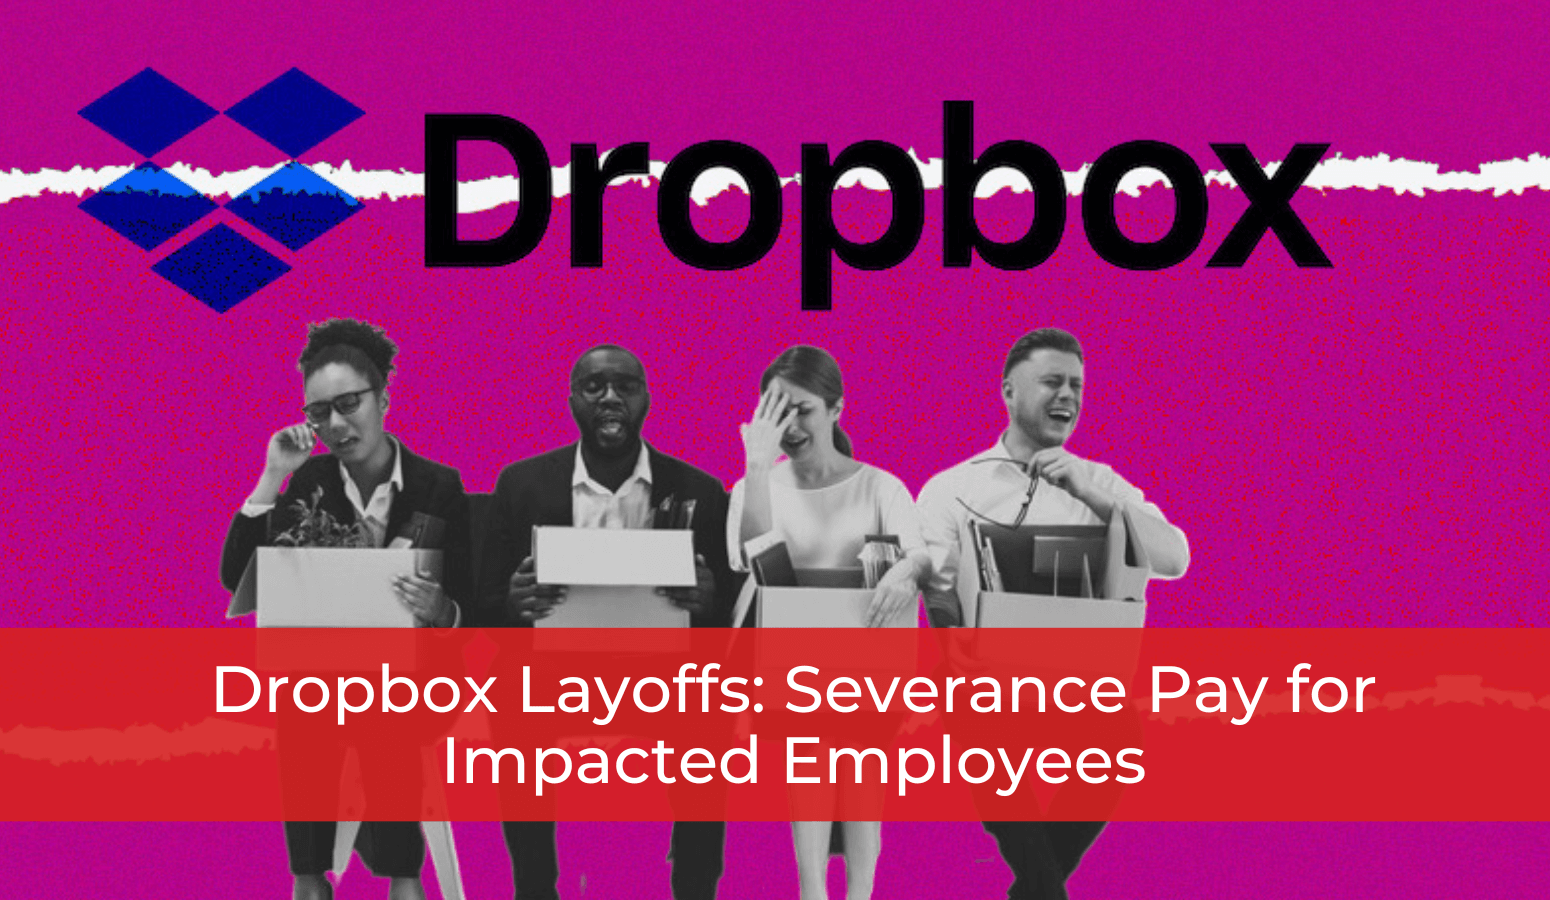 Featured image for “Dropbox Layoffs: Severance Pay for Impacted Employees”